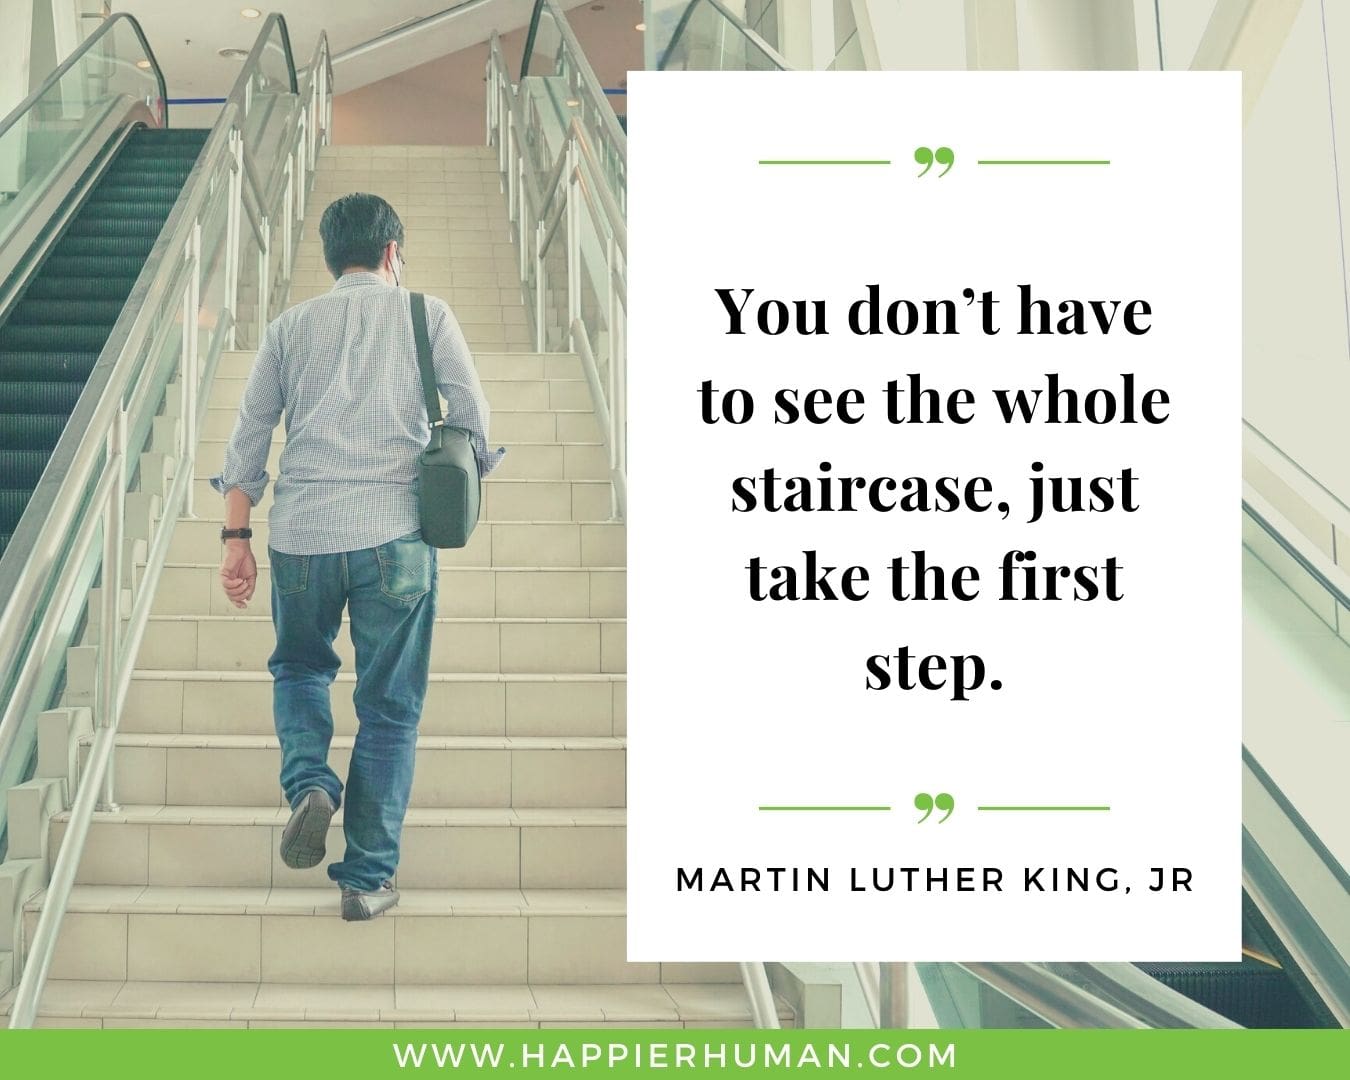 Overthinking Quotes - “You don’t have to see the whole staircase, just take the first step.” - Martin Luther King, Jr